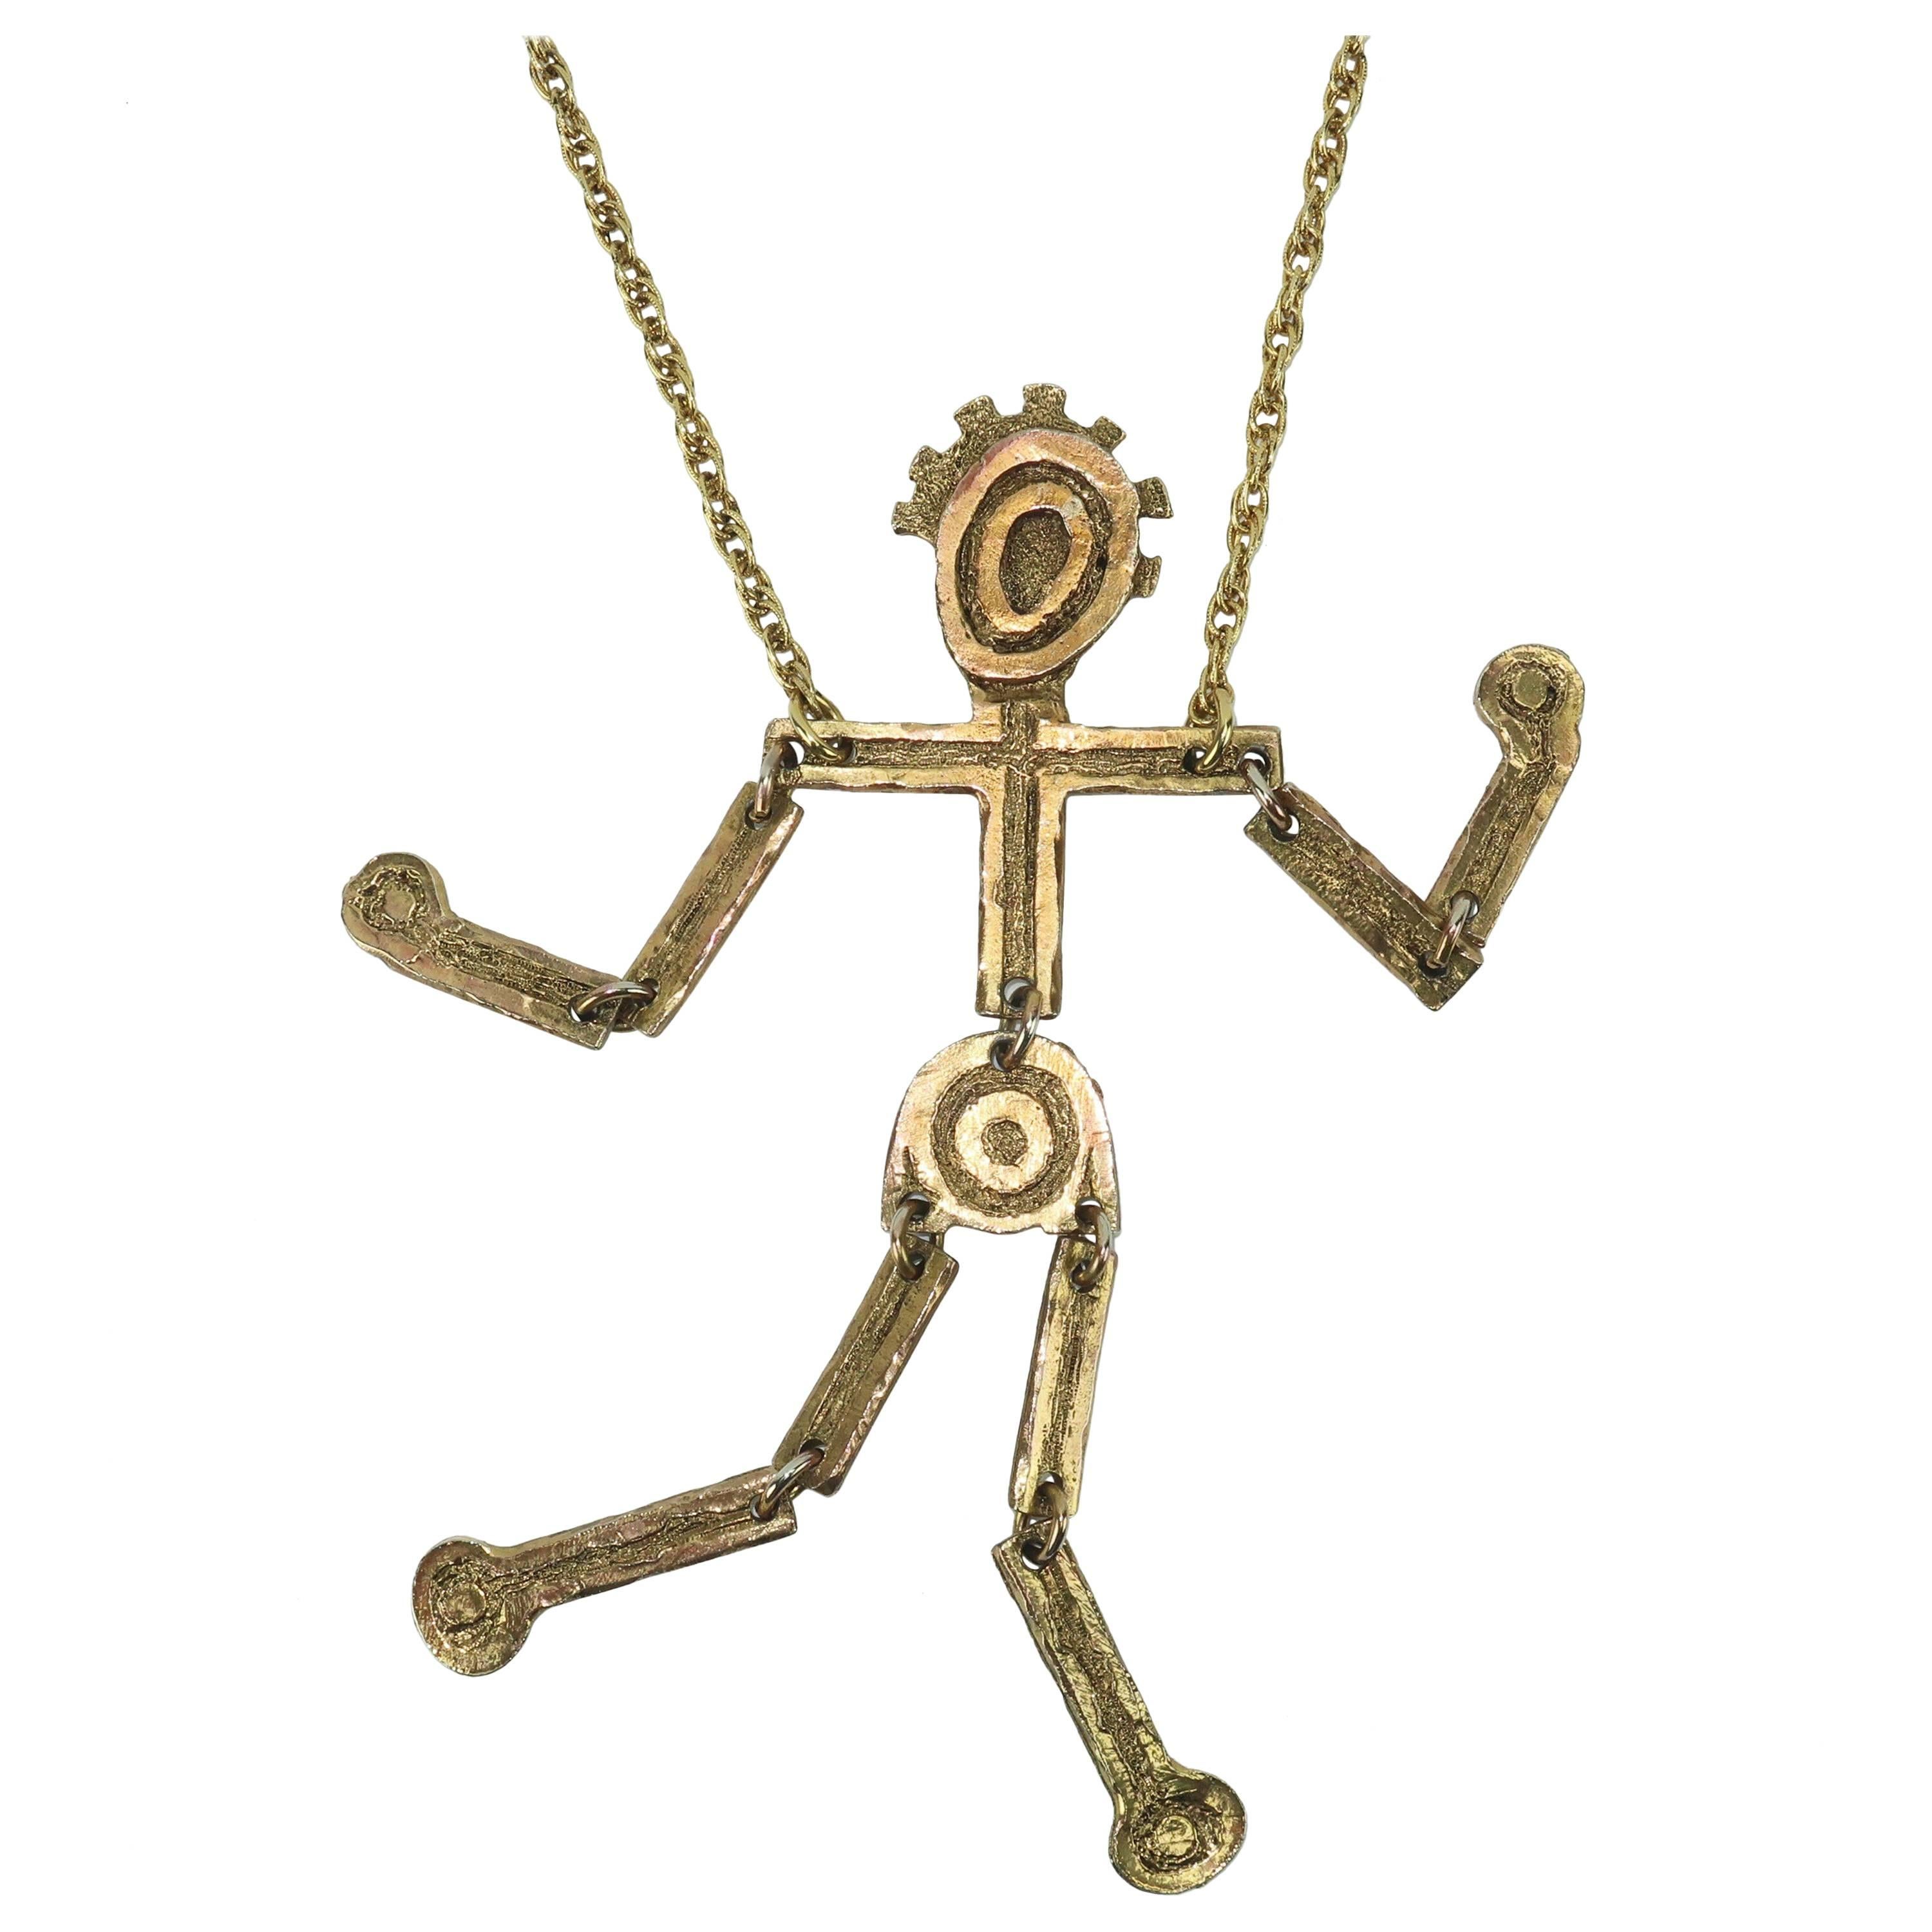 C.1970 Mr. We Articulated Man Pendant Necklace